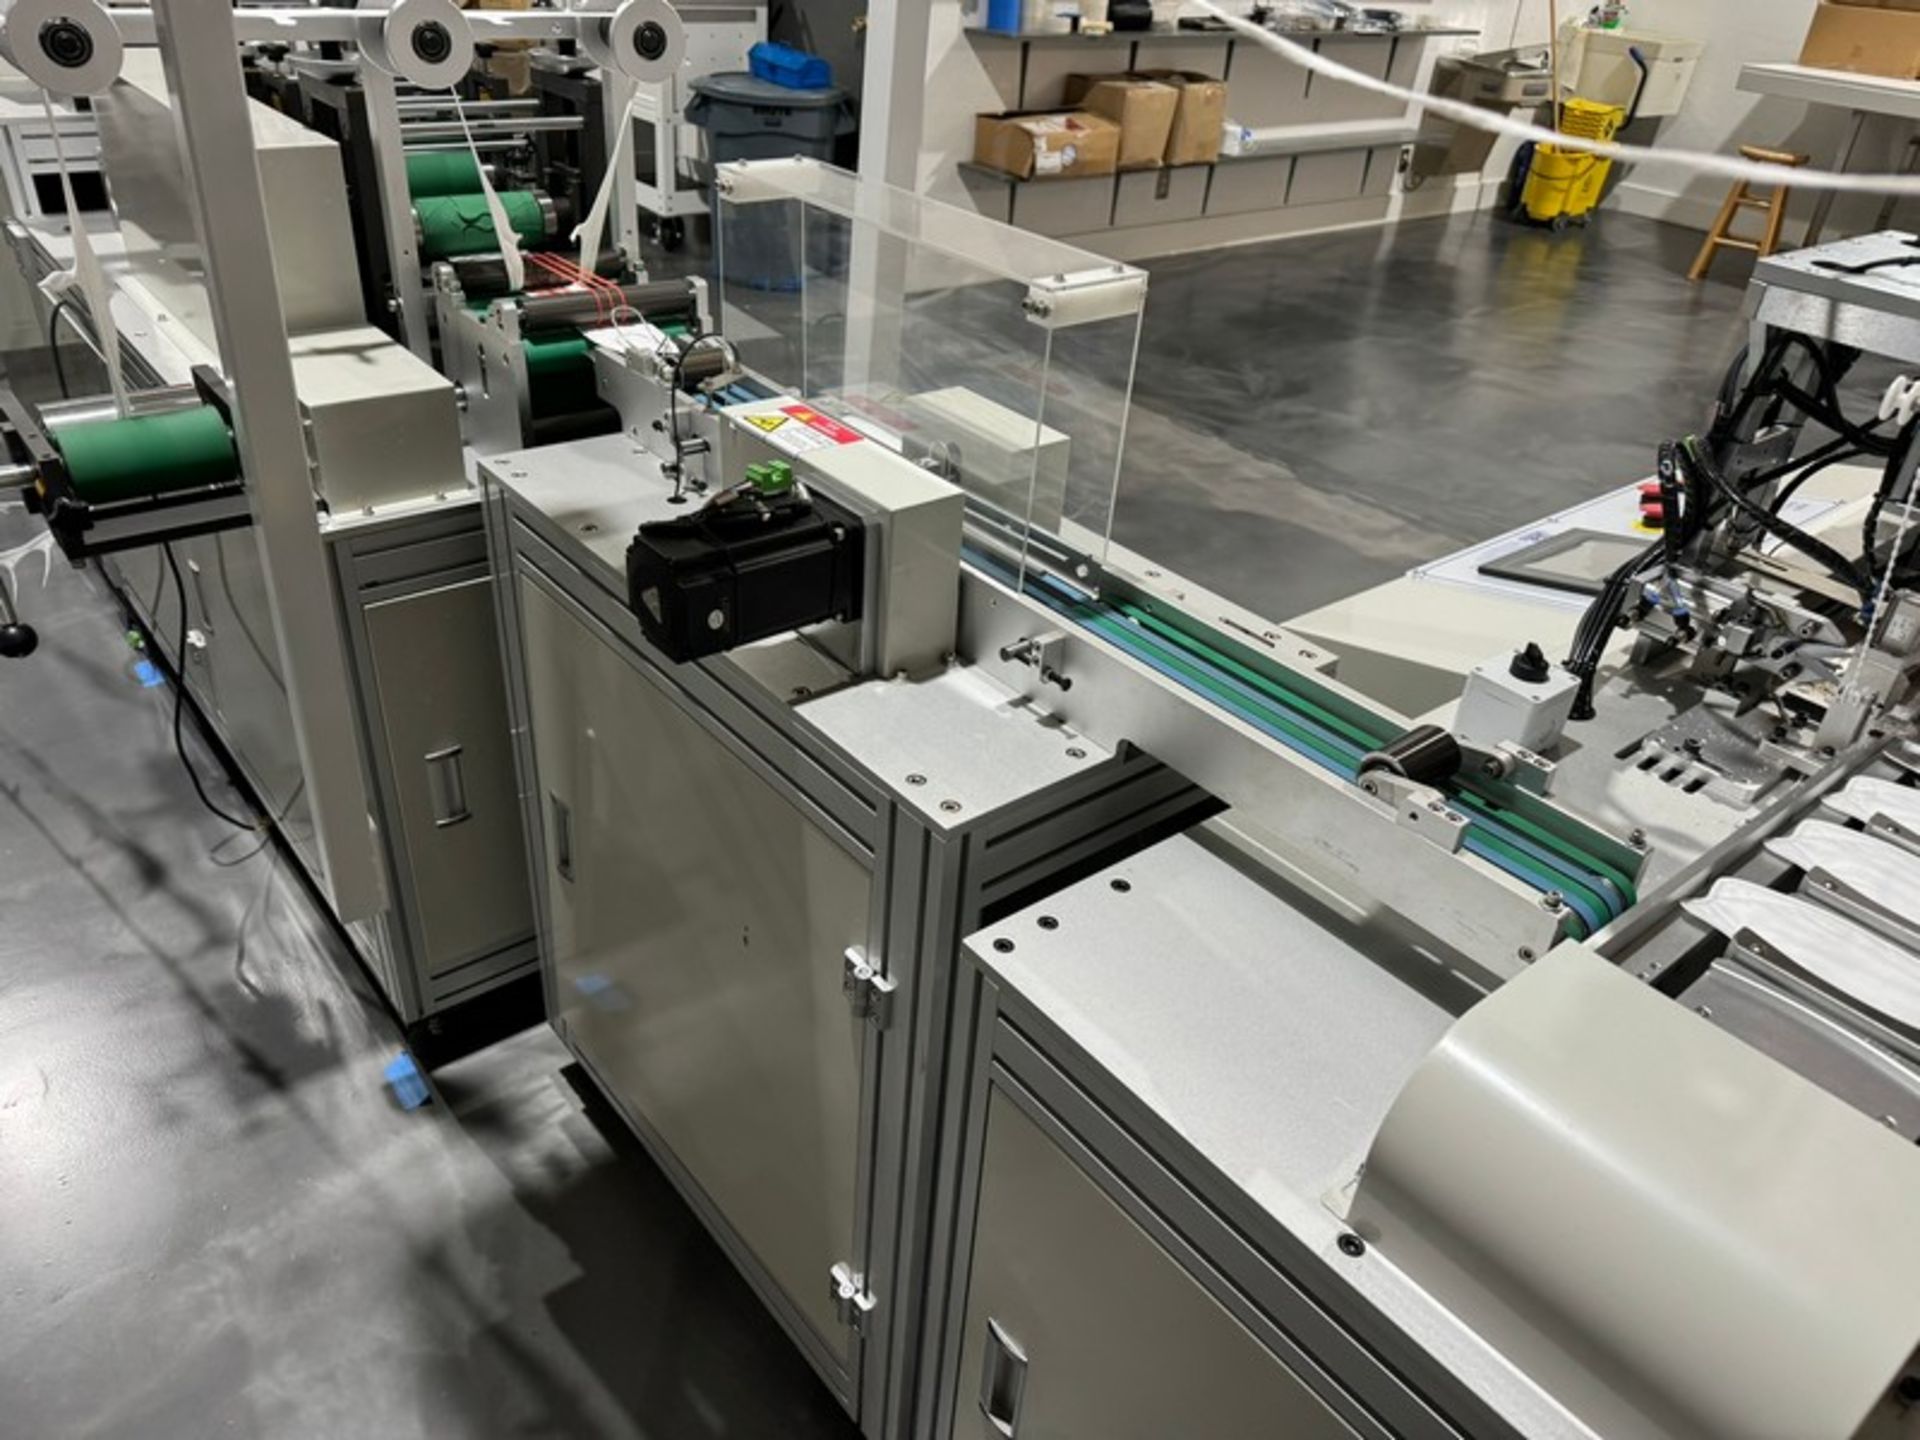 2022 KYD Automatic 6,000 Units Per Hour Mask Manufacturing Line, Includes Unwinding Station, Rolling - Image 10 of 30